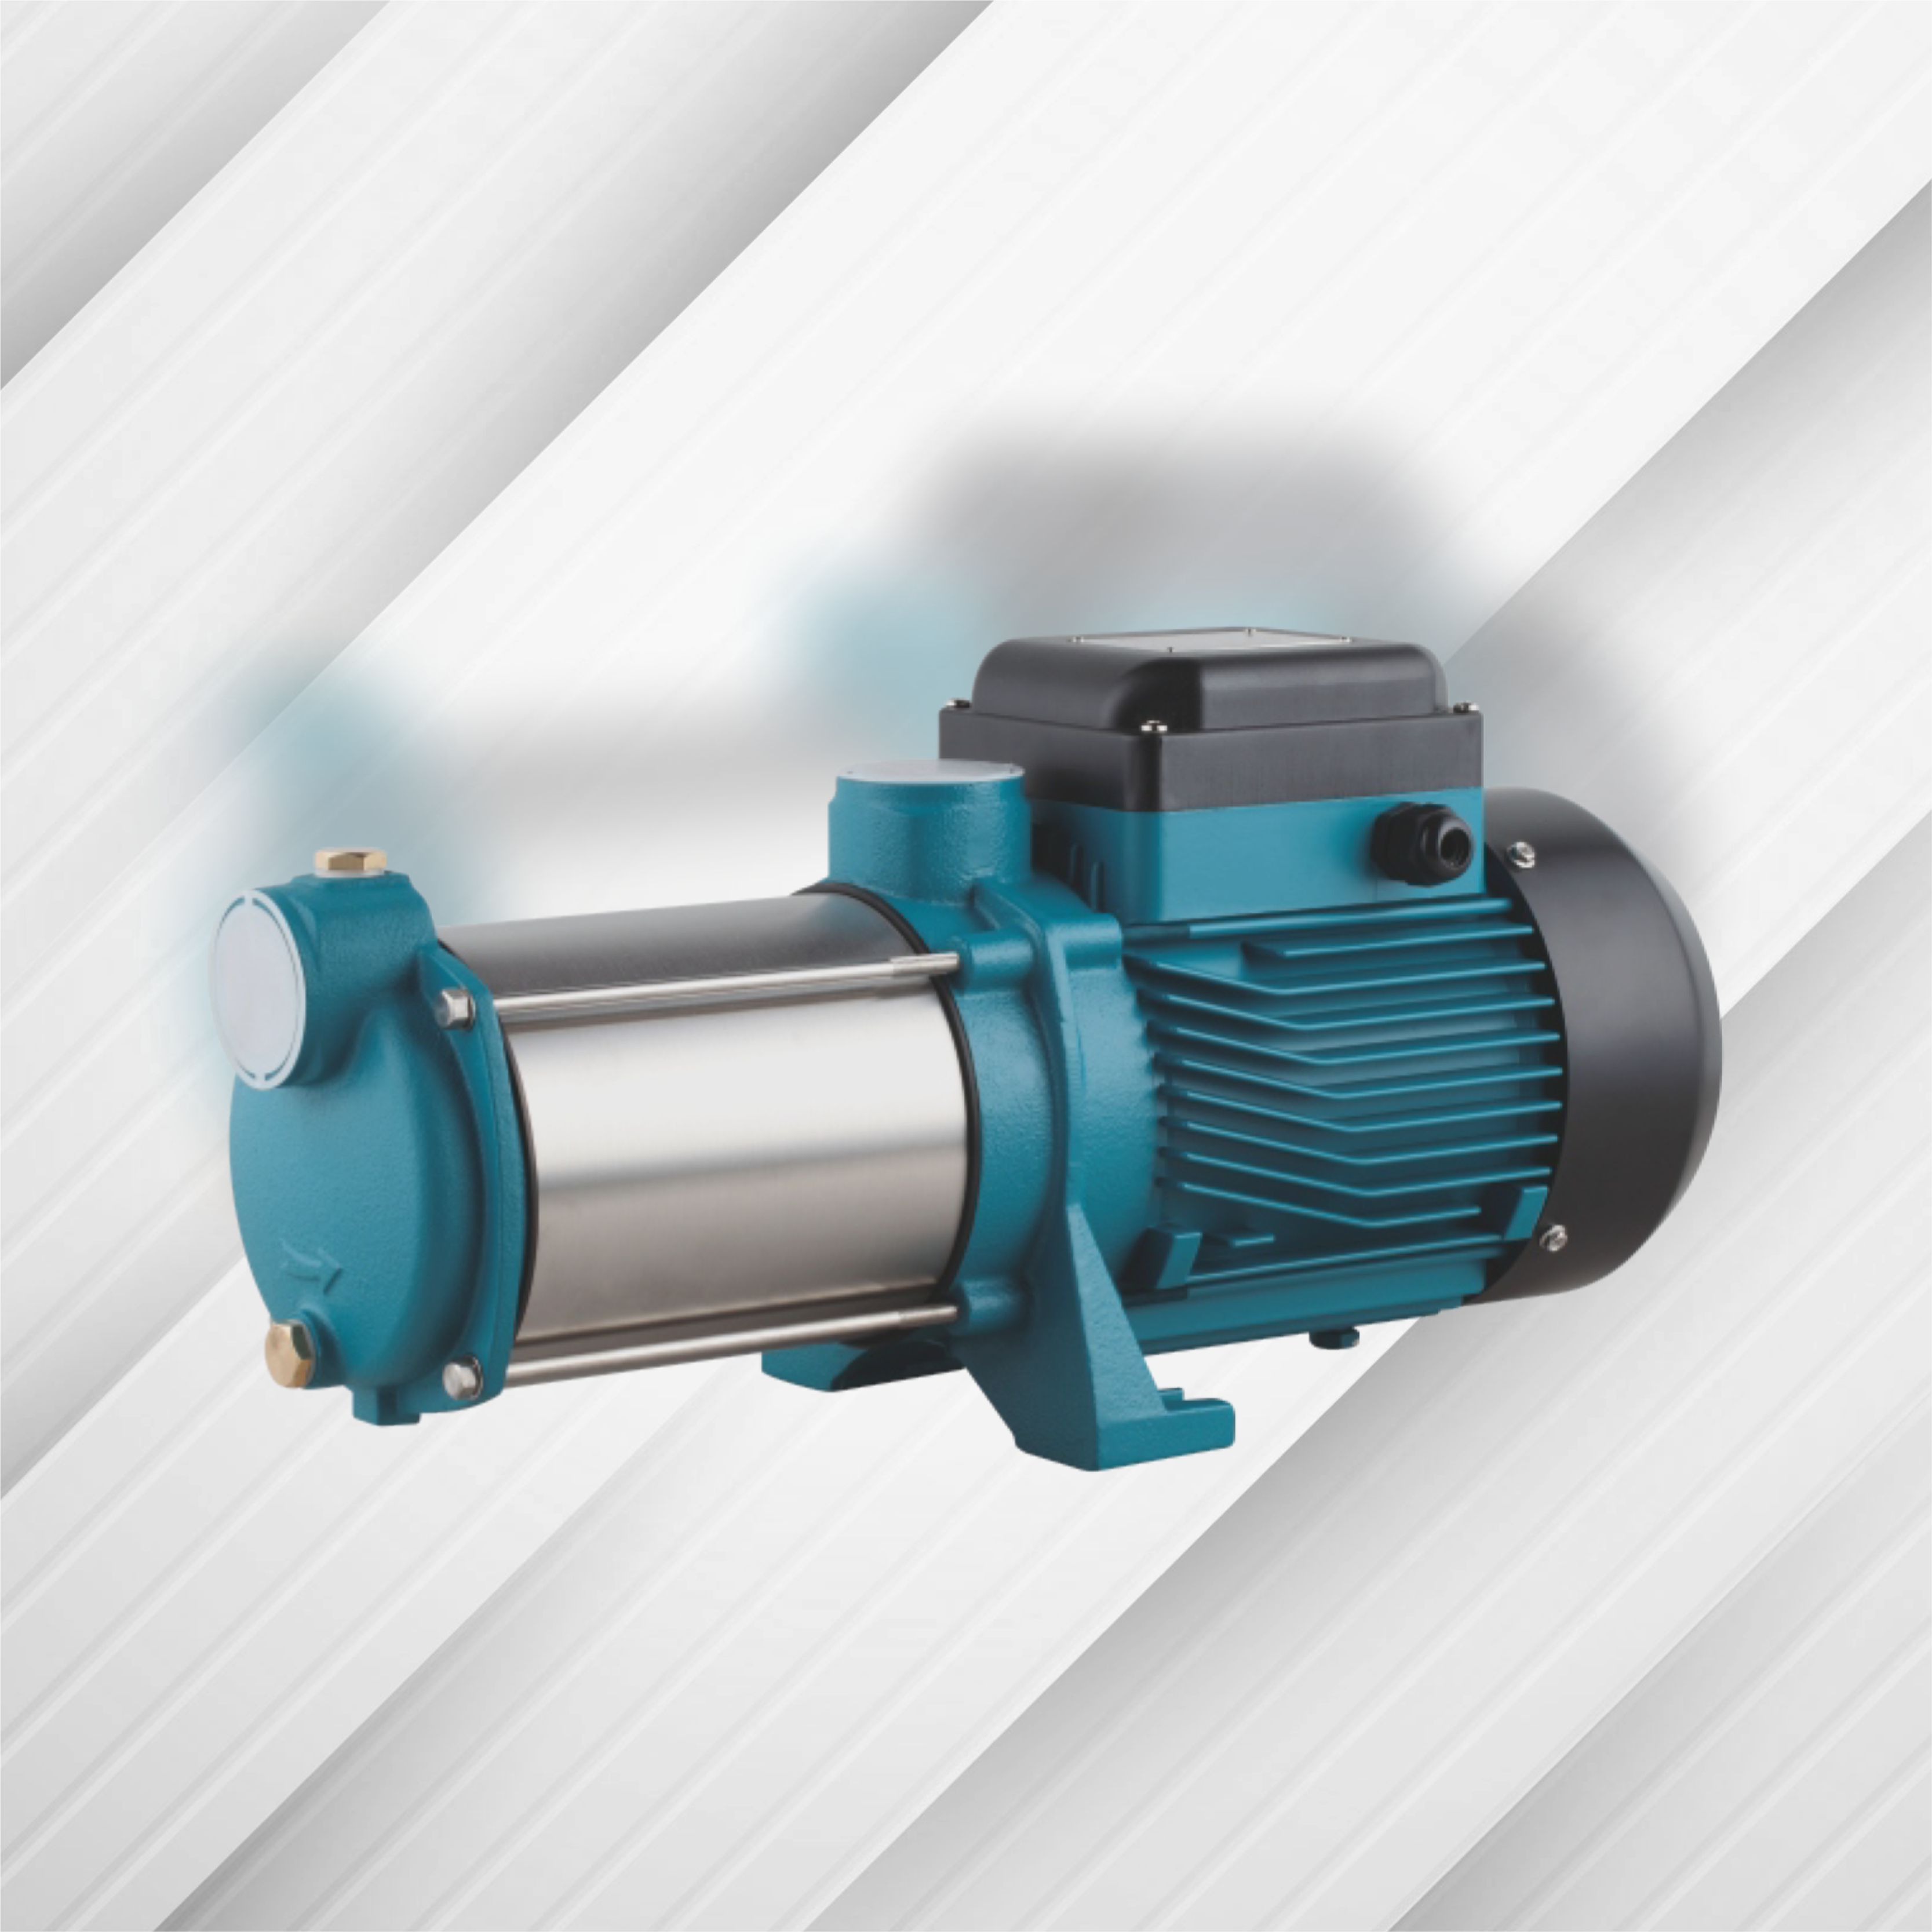 Essential Features of Horizontal Multistage Centrifugal Pump 